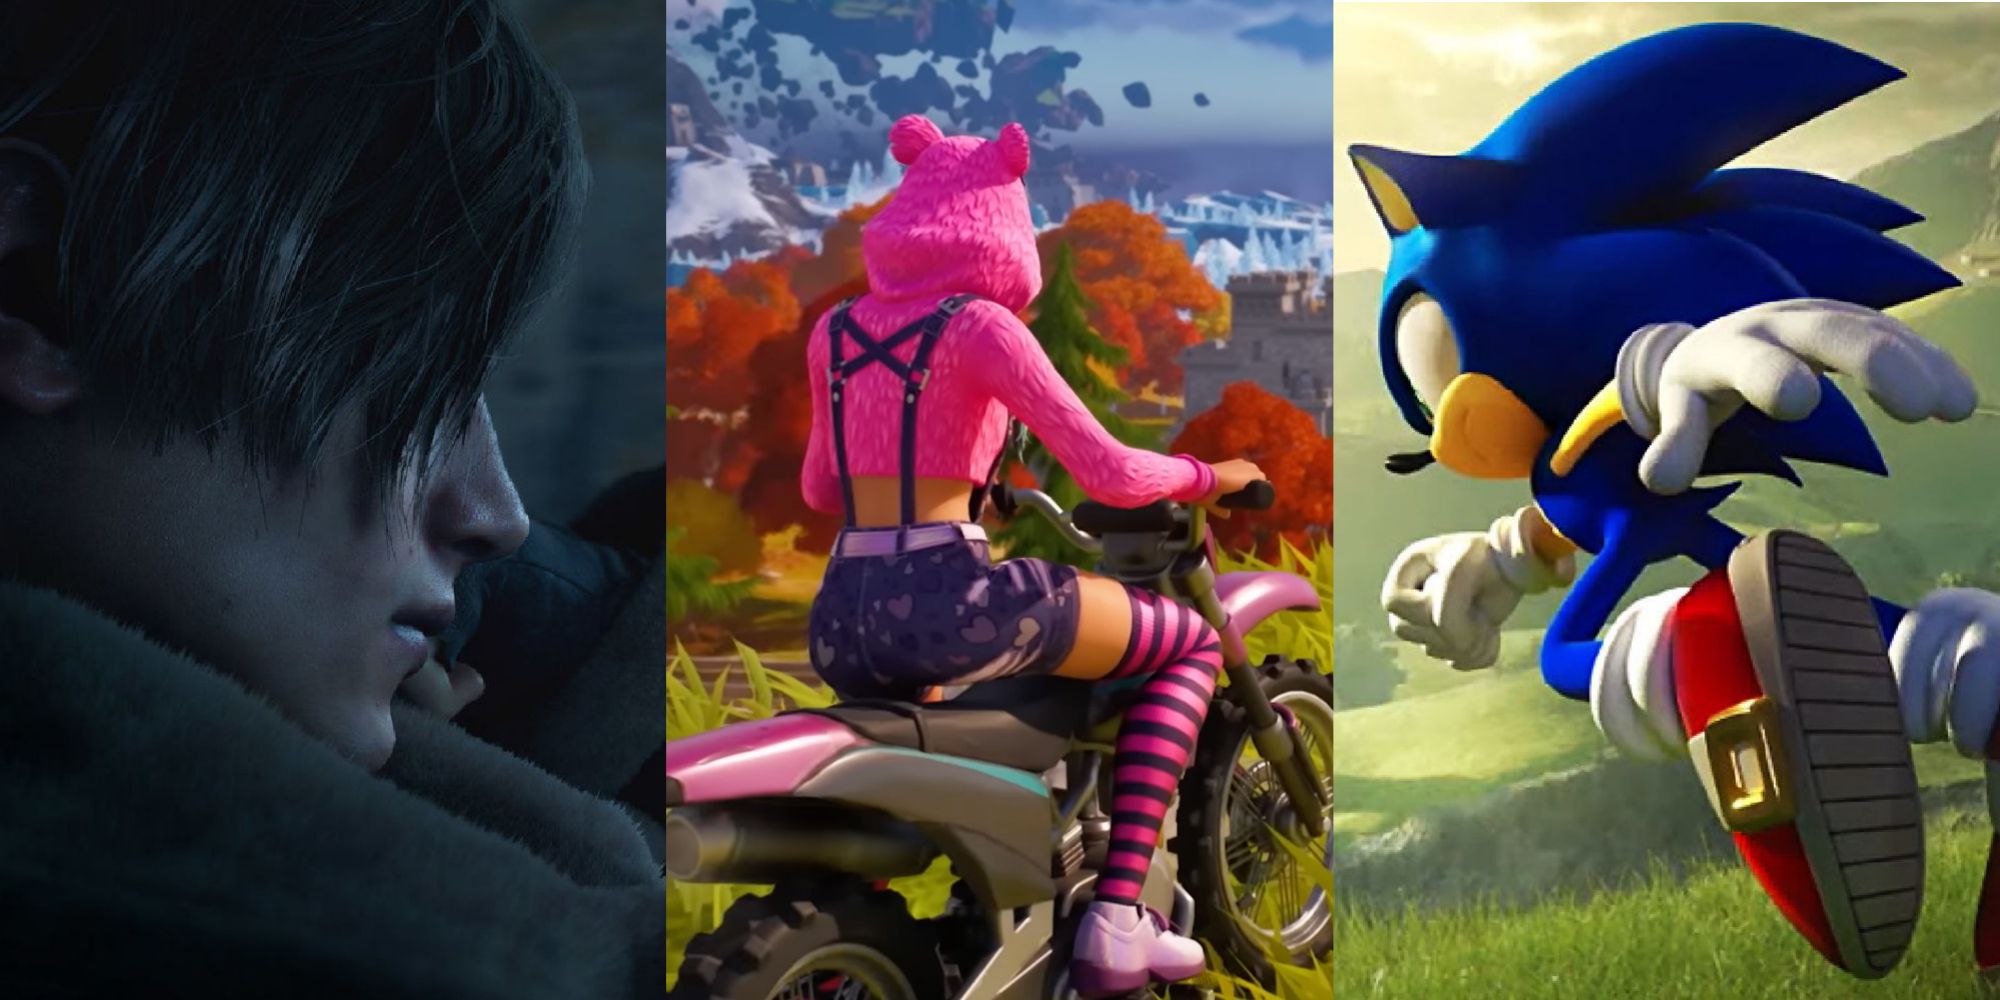 Cover for X Fortnite Collabs We Want To See Happen Featuring Leon S Kennedy from Resident Evil 4 Remake, Fortnite Character on Bike, and Sonic from Sonic Frontiers